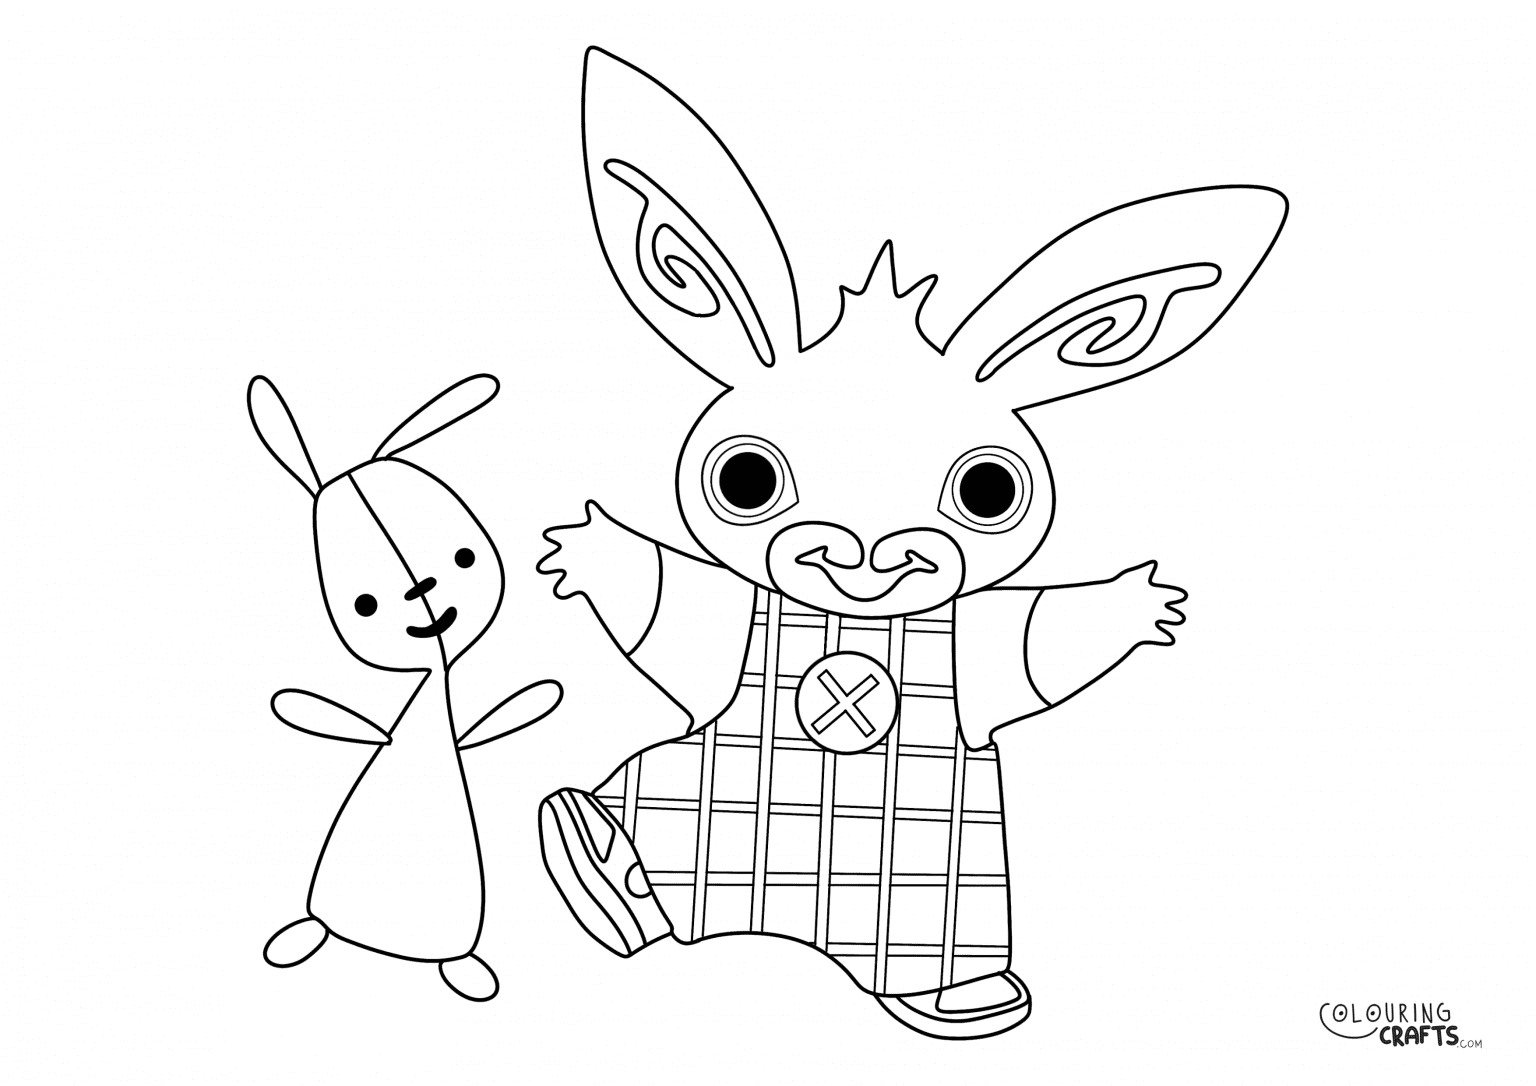 Bing And Flop Colouring Page - Colouring Crafts